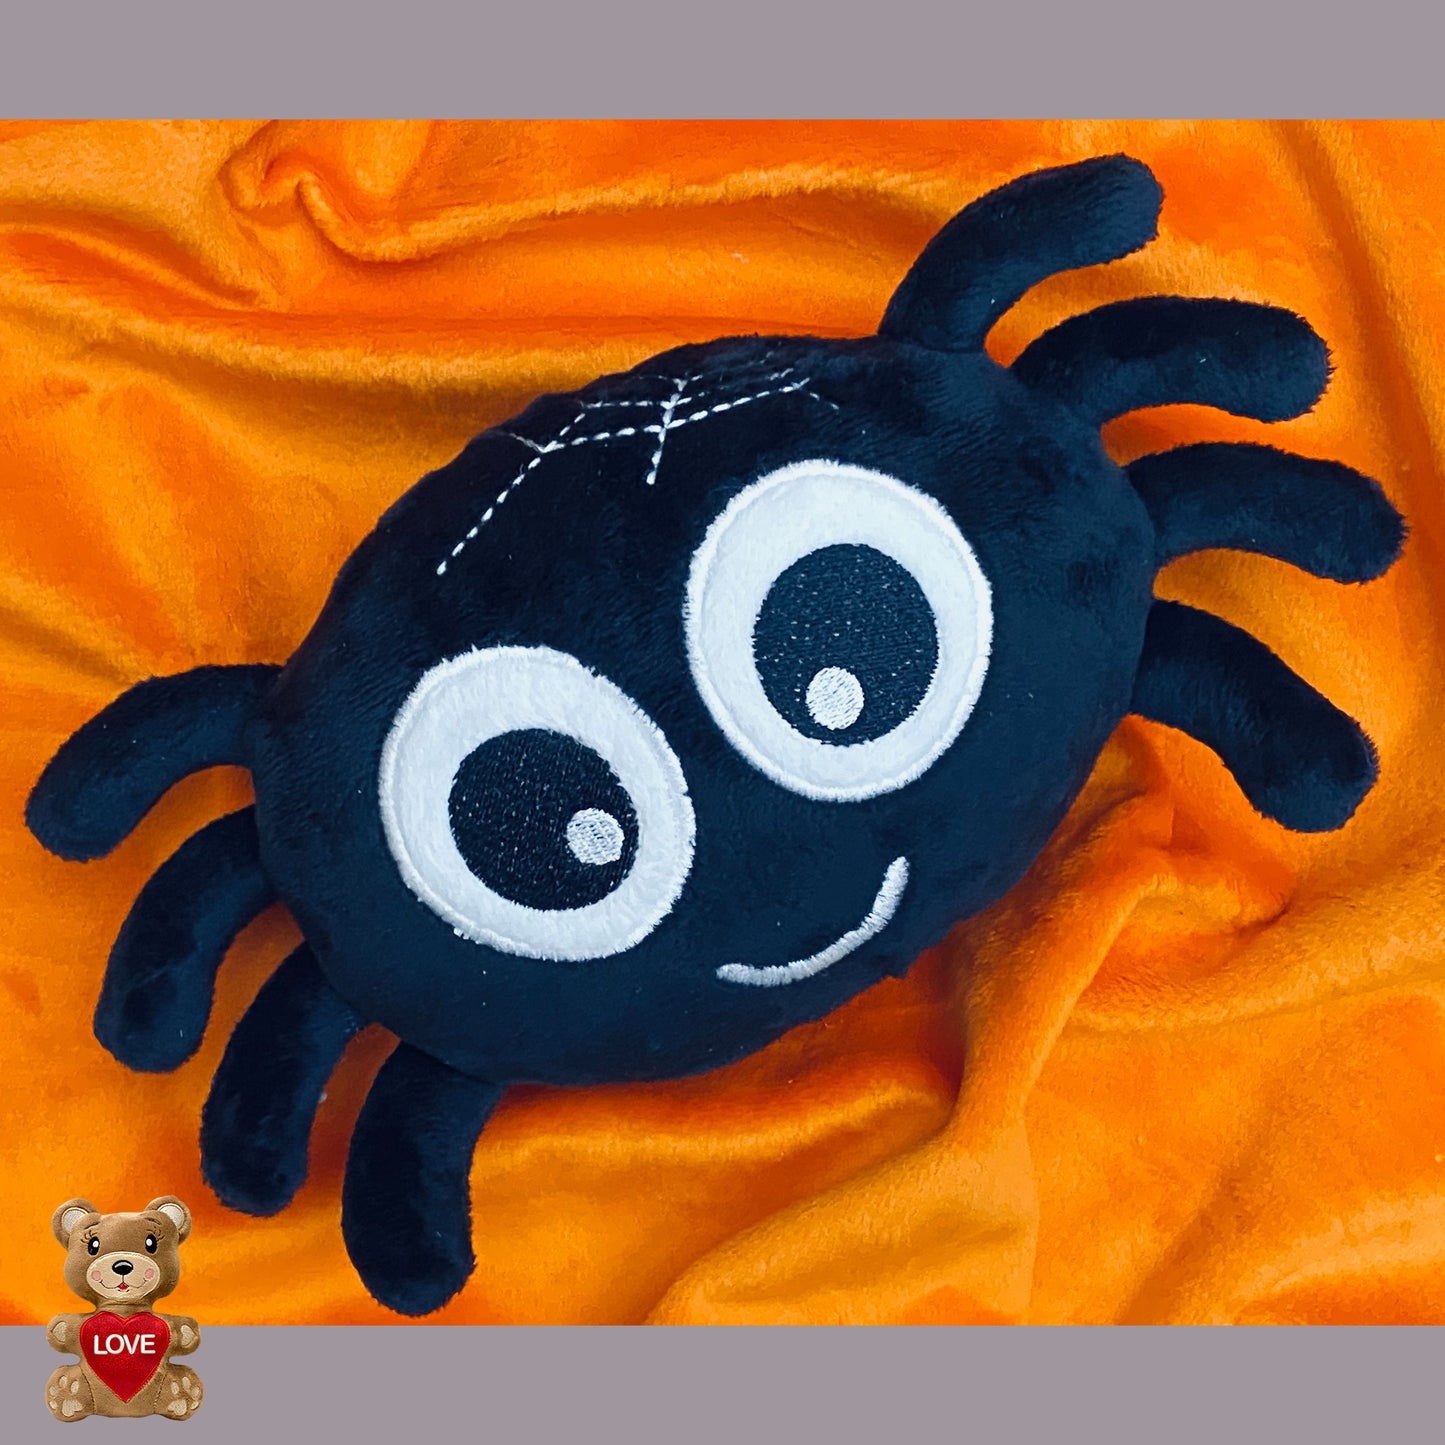 Personalised embroidery Plush Soft Toy Spider ,Super cute personalised soft plush toy